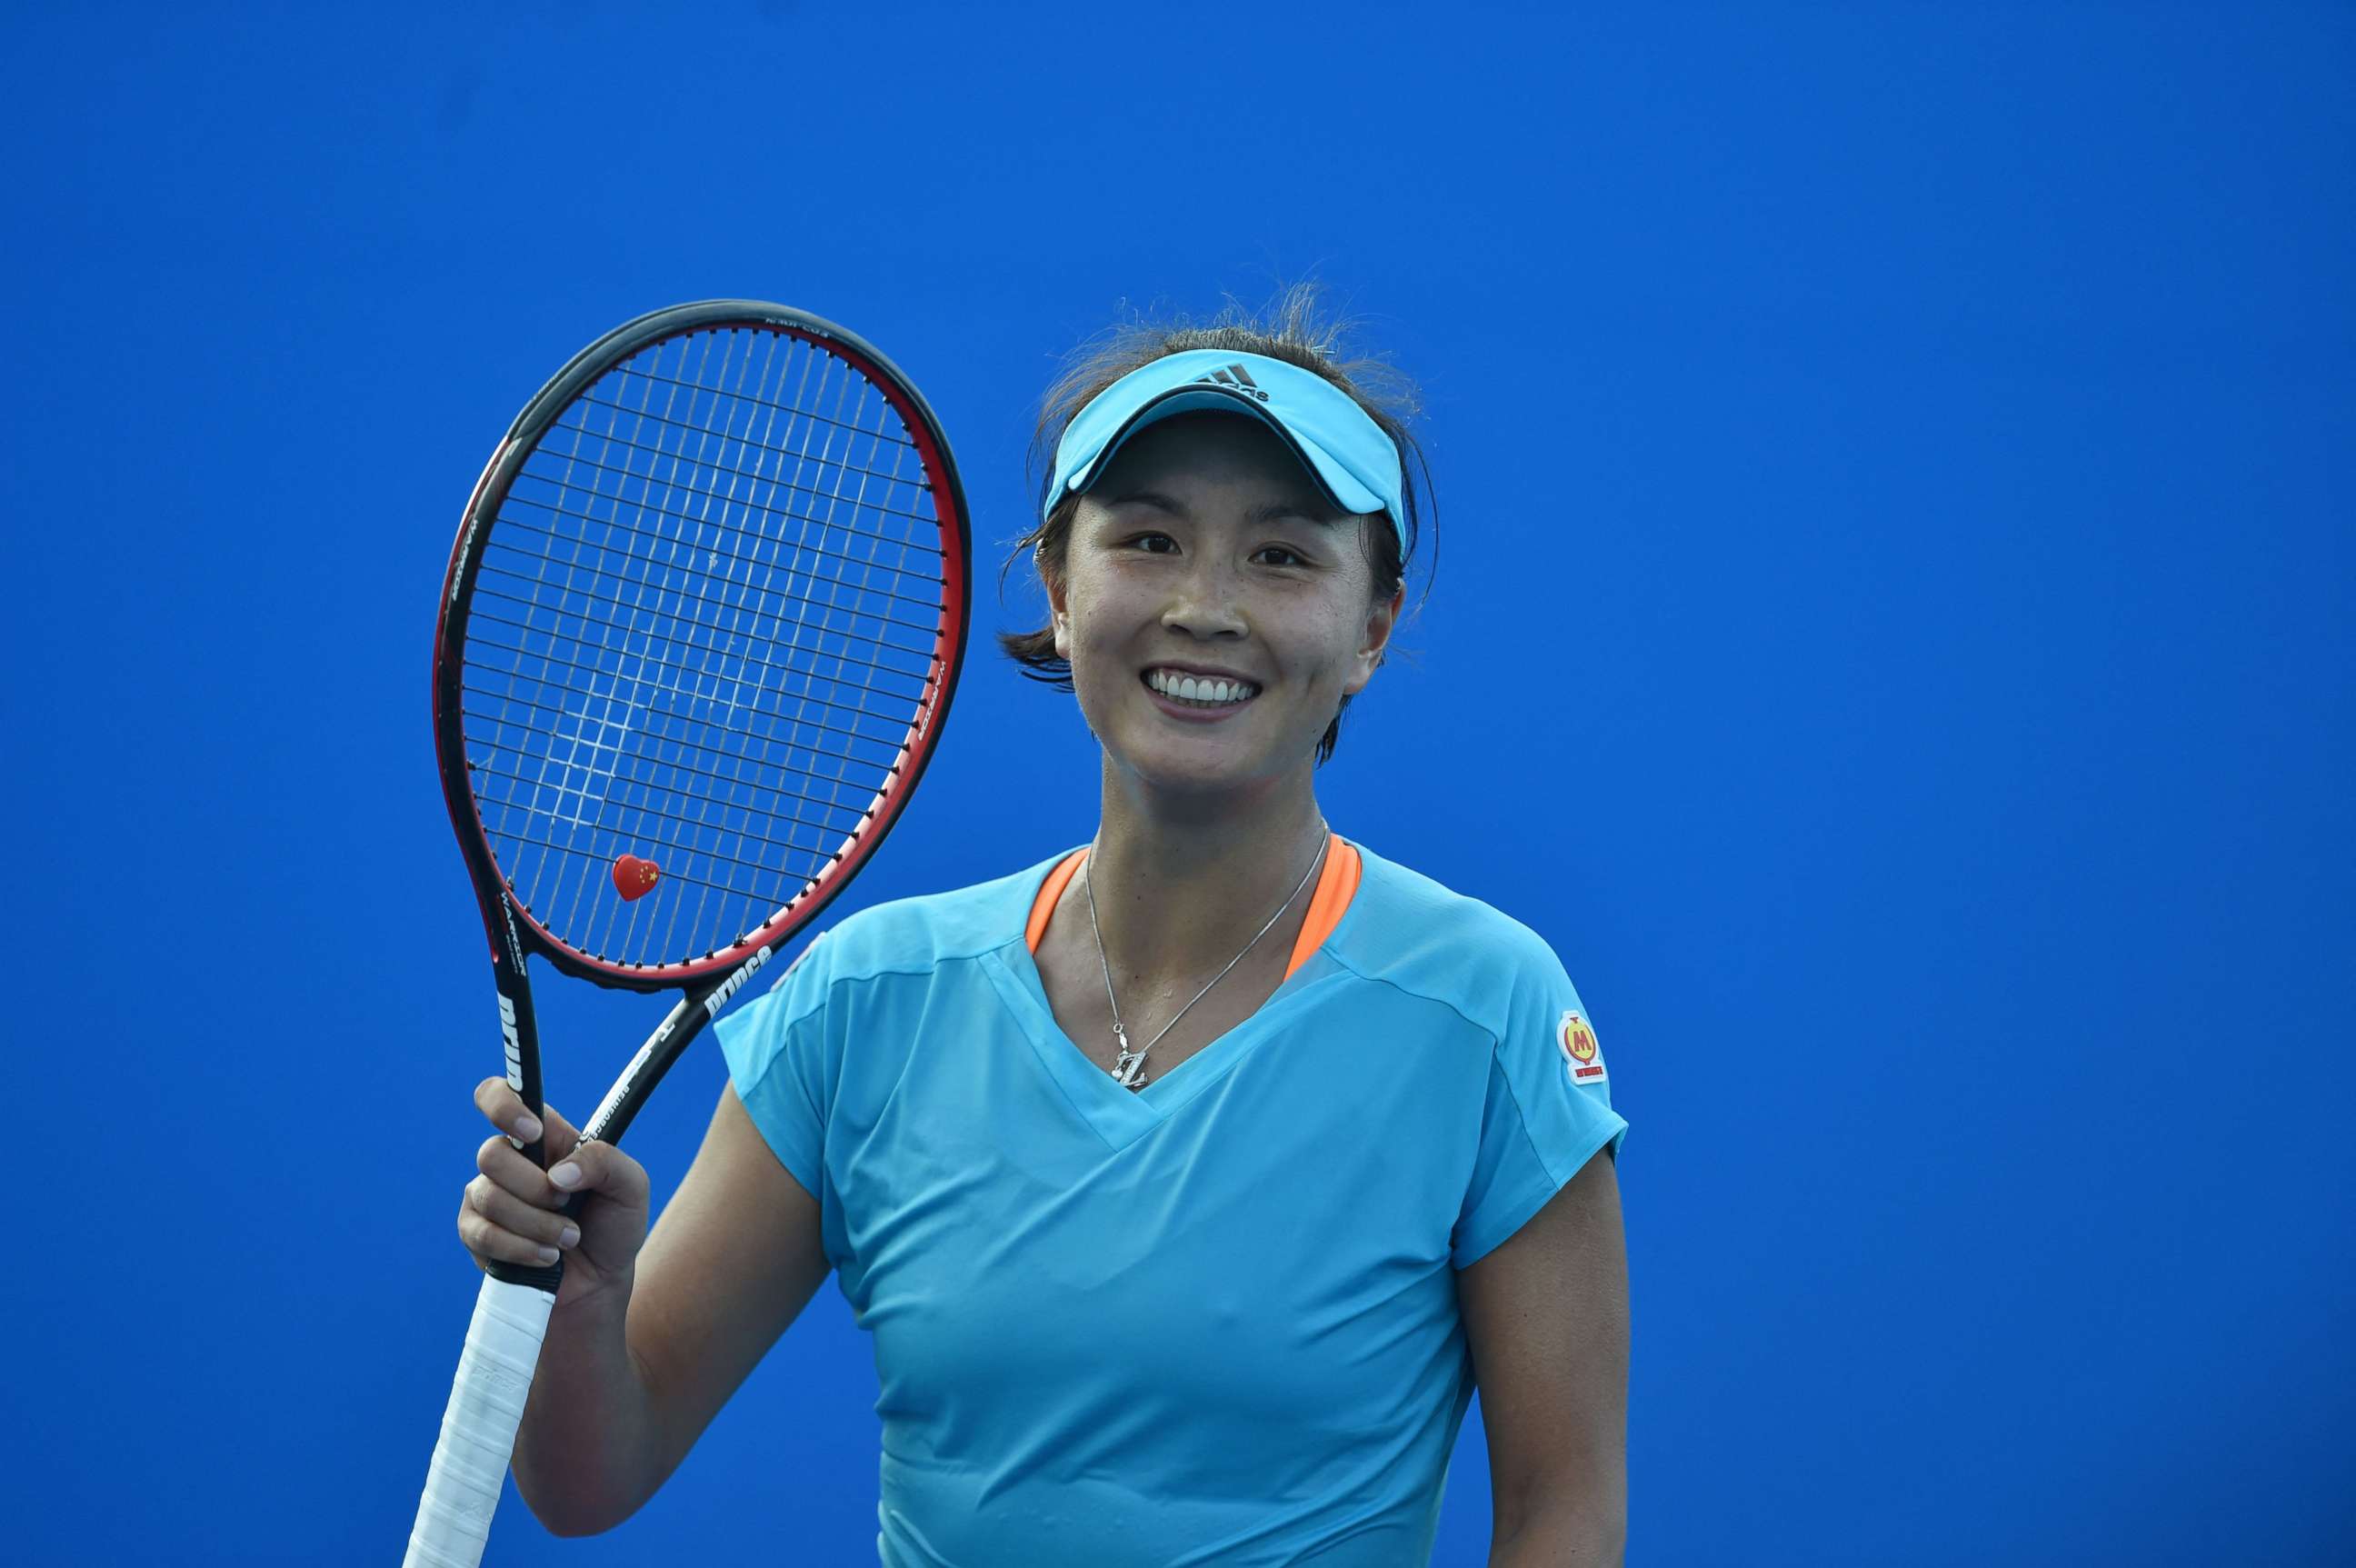 PHOTO: (FILES) In this file photo taken on January 16, 2017, Peng Shuai, of China, celebrates her win against Daria Kasatkina, of Russia, during their women's singles first round match on day one of the Australian Open tennis tournament in Melbourne. 